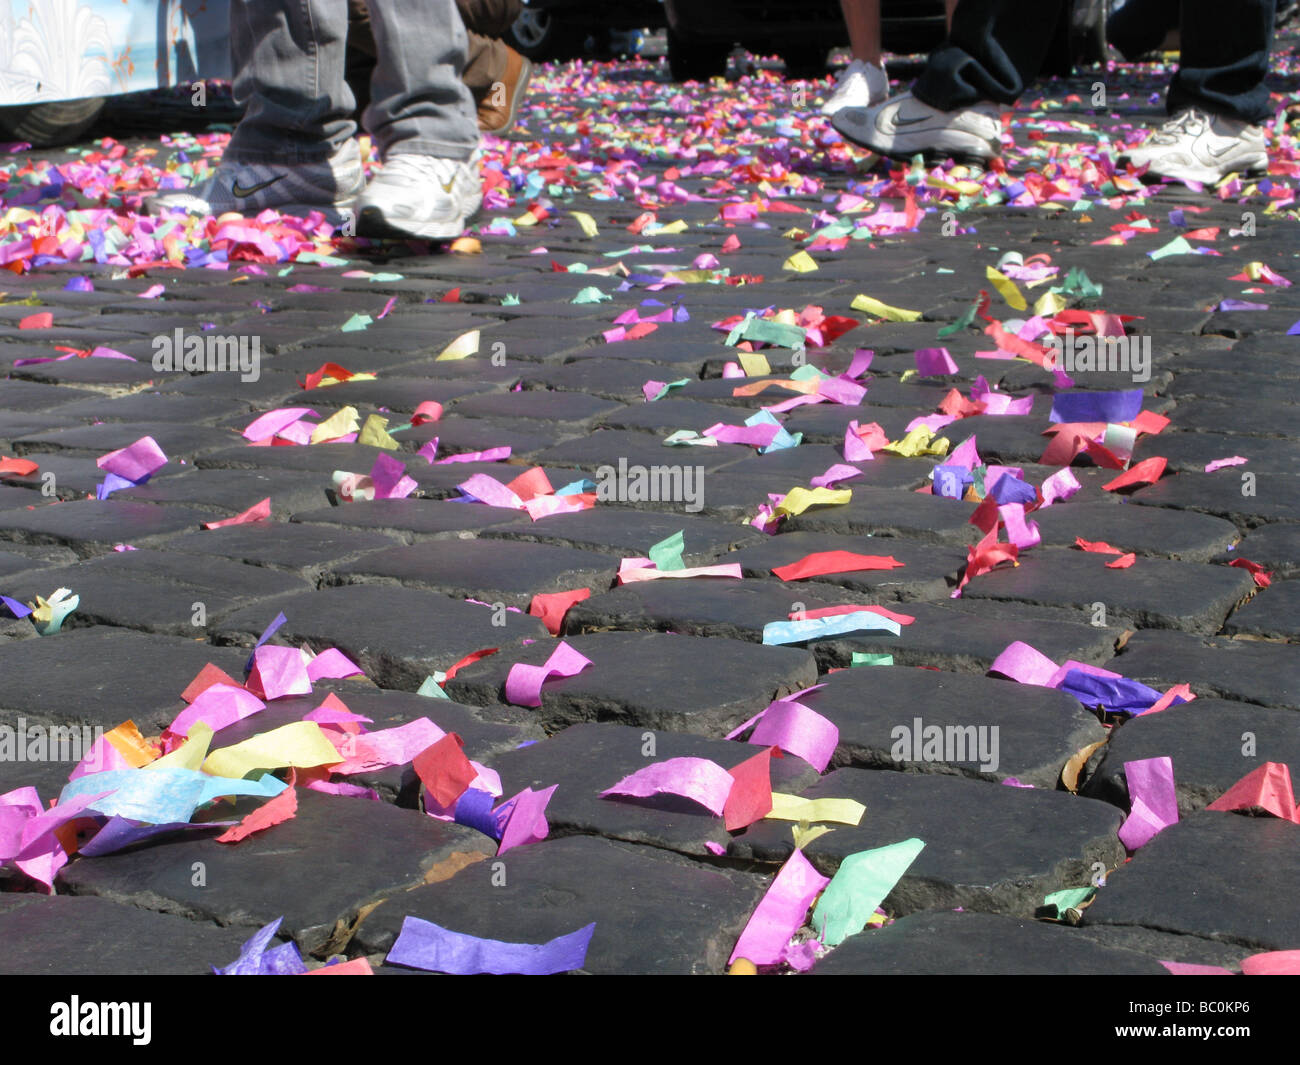 lots of colourful confetti and garlands on paved street road in sun Stock Photo